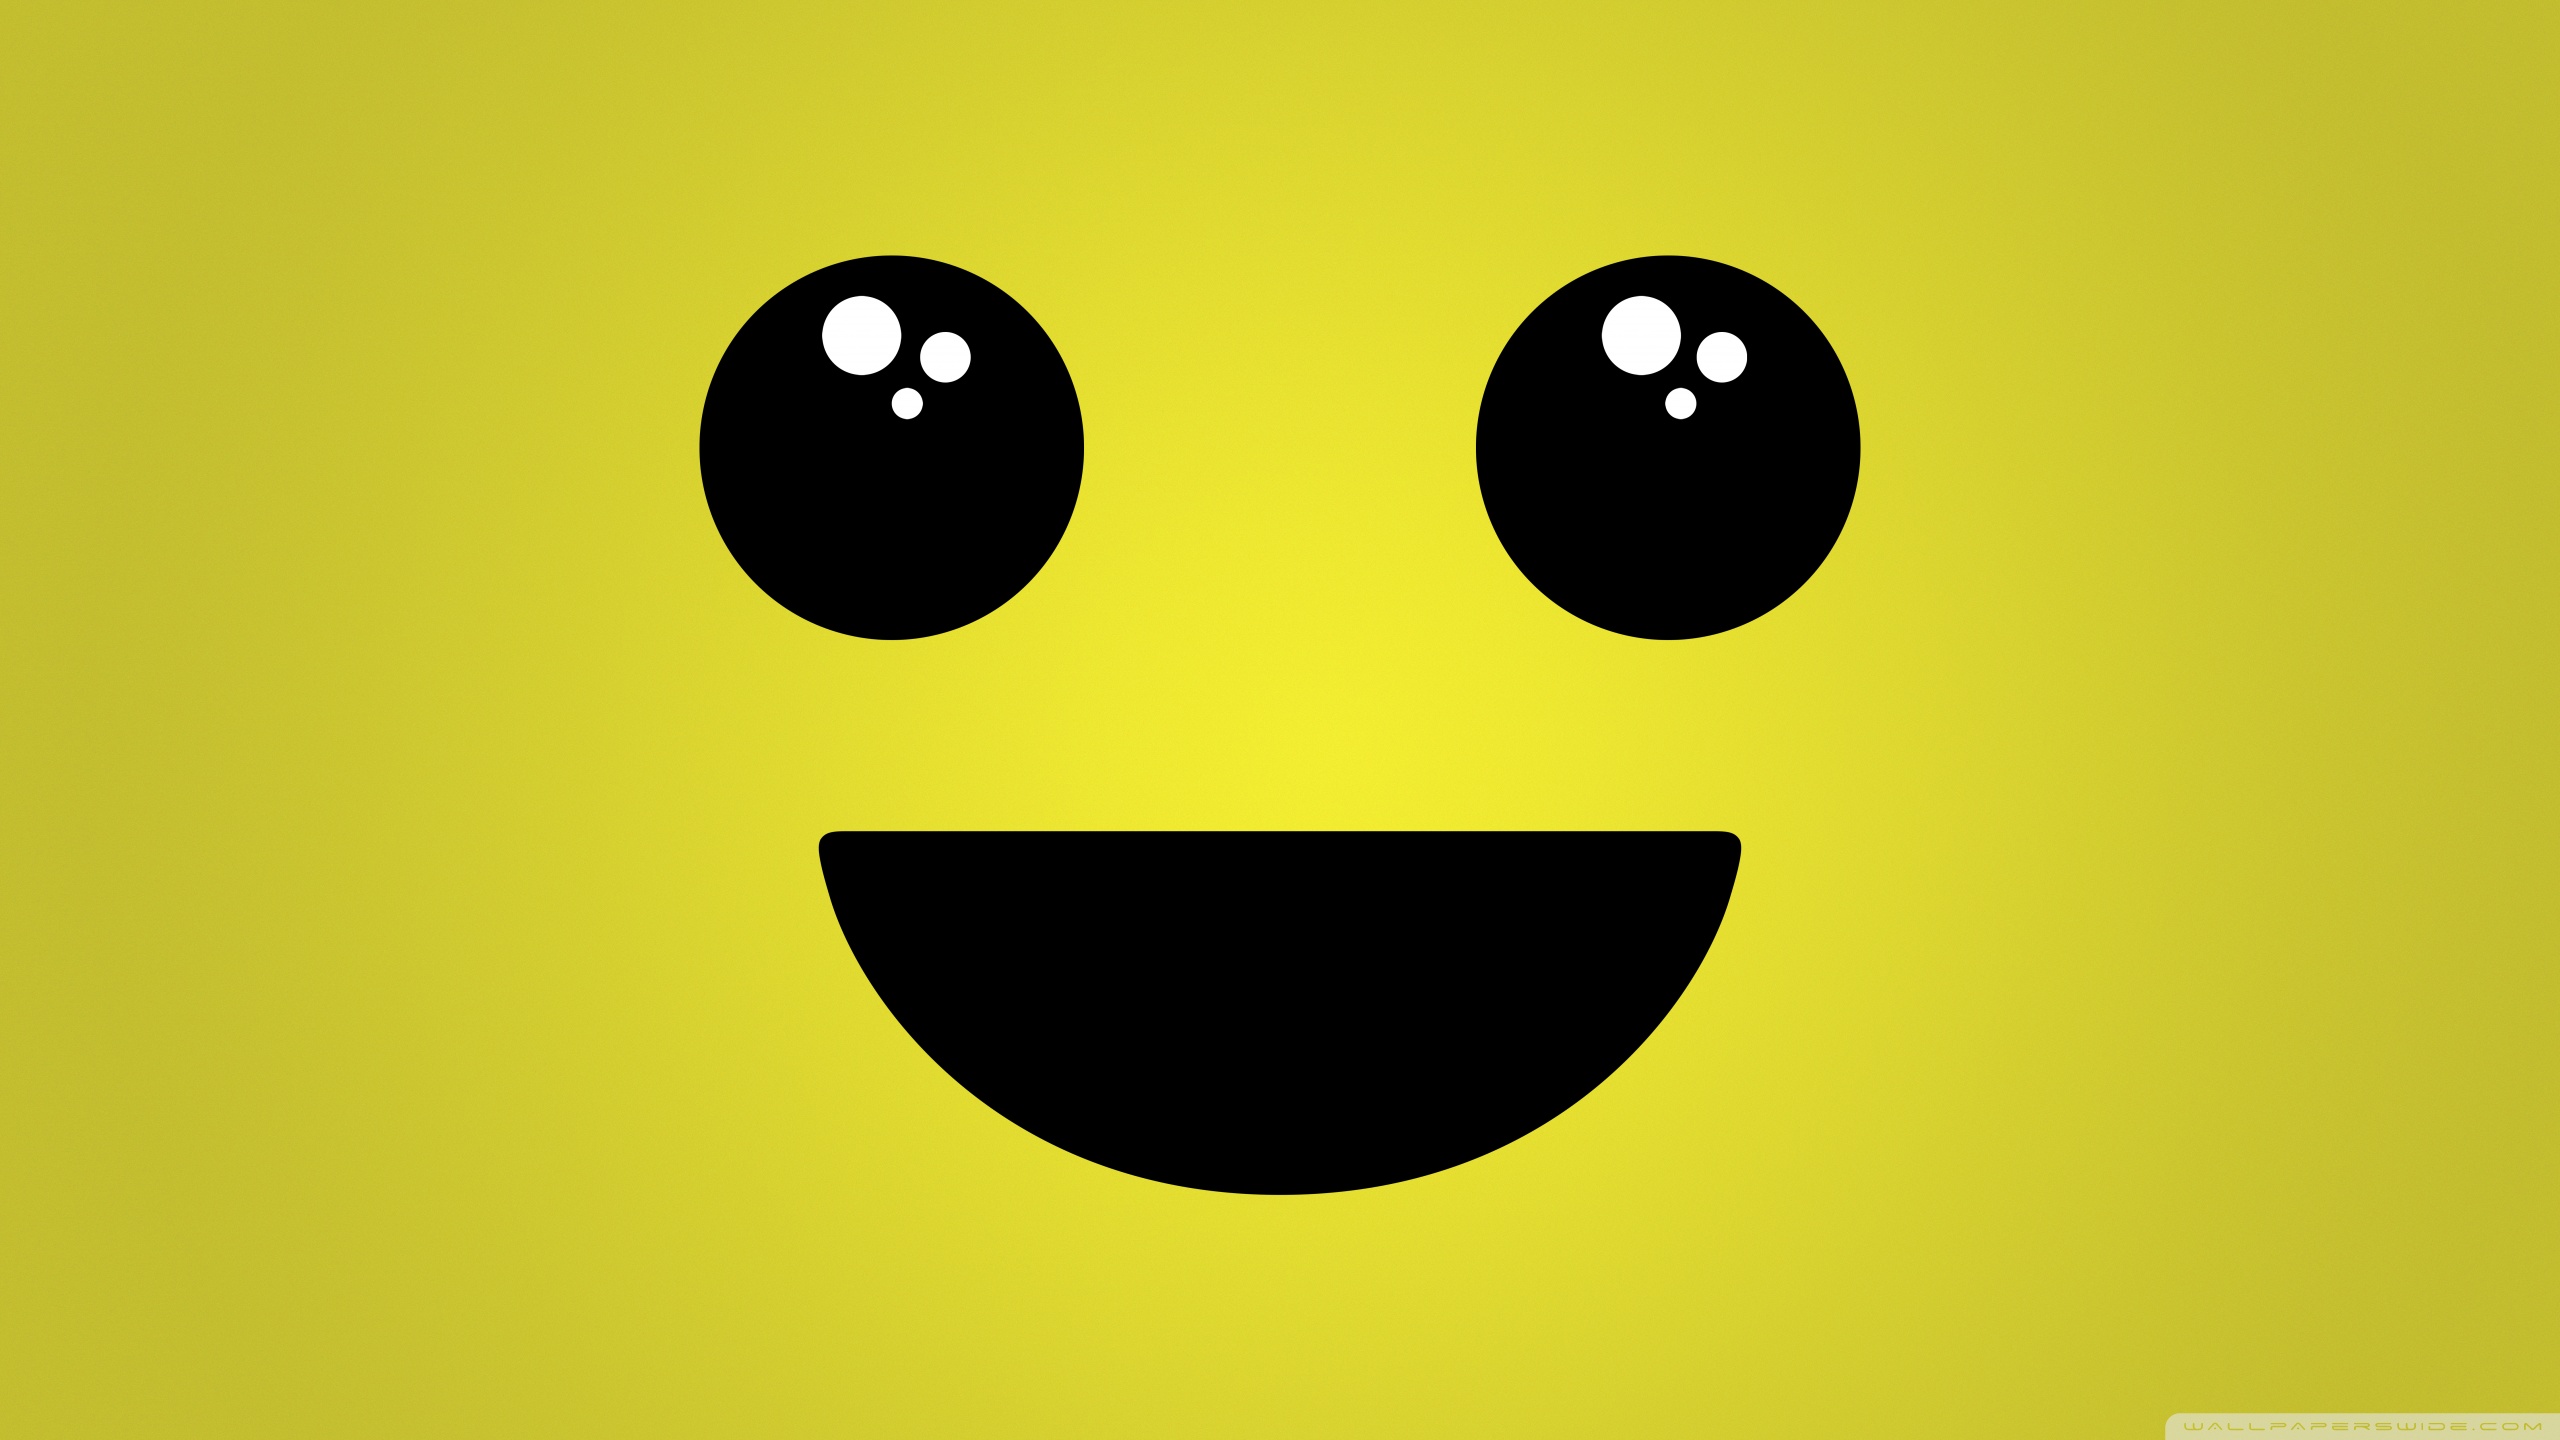 Smiley Wallpapers  Top 20 Best Smiley Wallpapers  HQ 